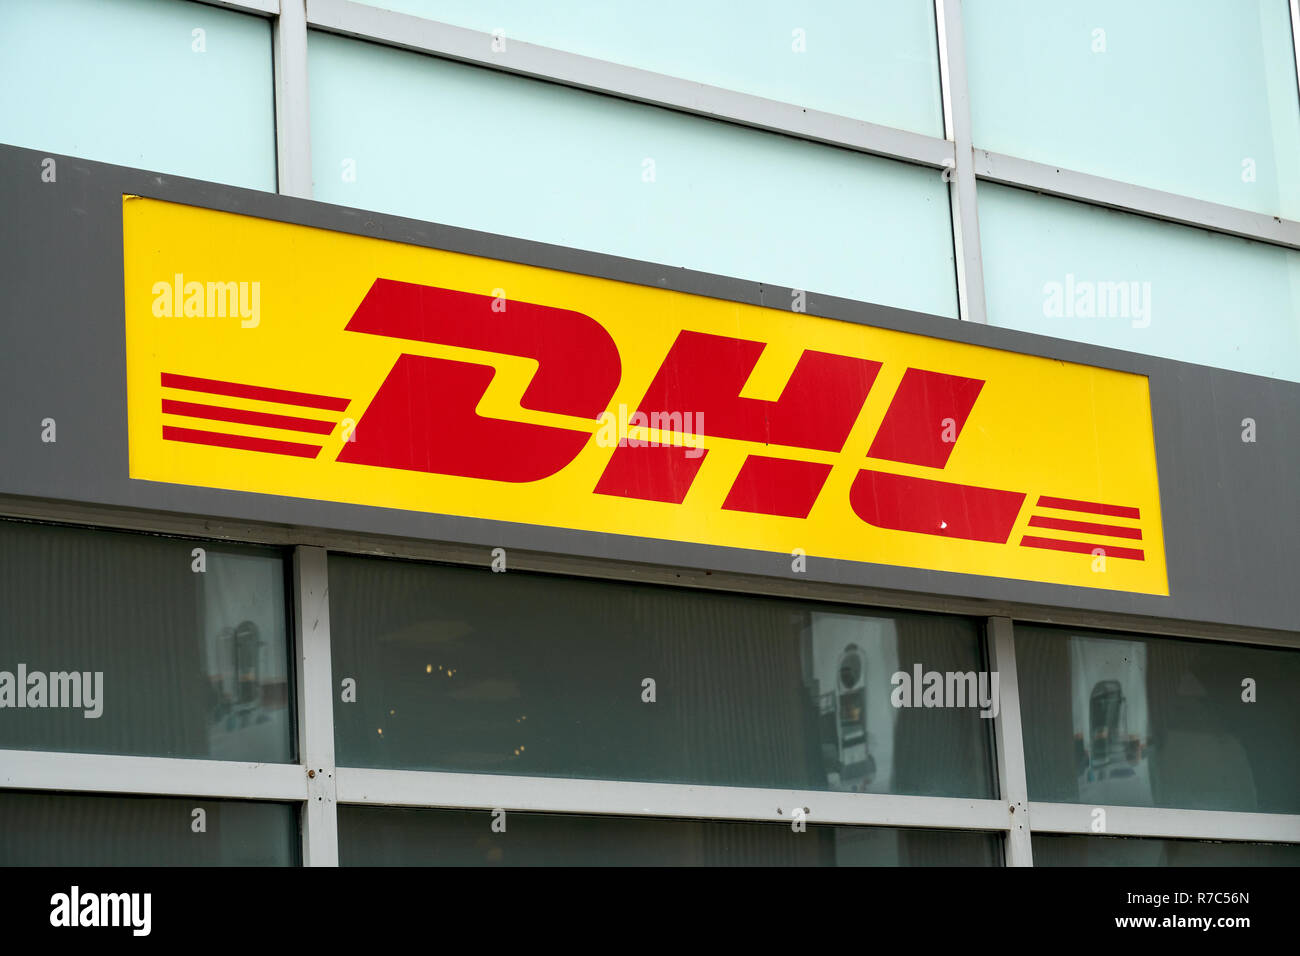 MONTREAL, CANADA - OCTOBER 4, 2018: DHL office and sign. DHL is a German logistics company providing international courier, parcel, and express mail s Stock Photo